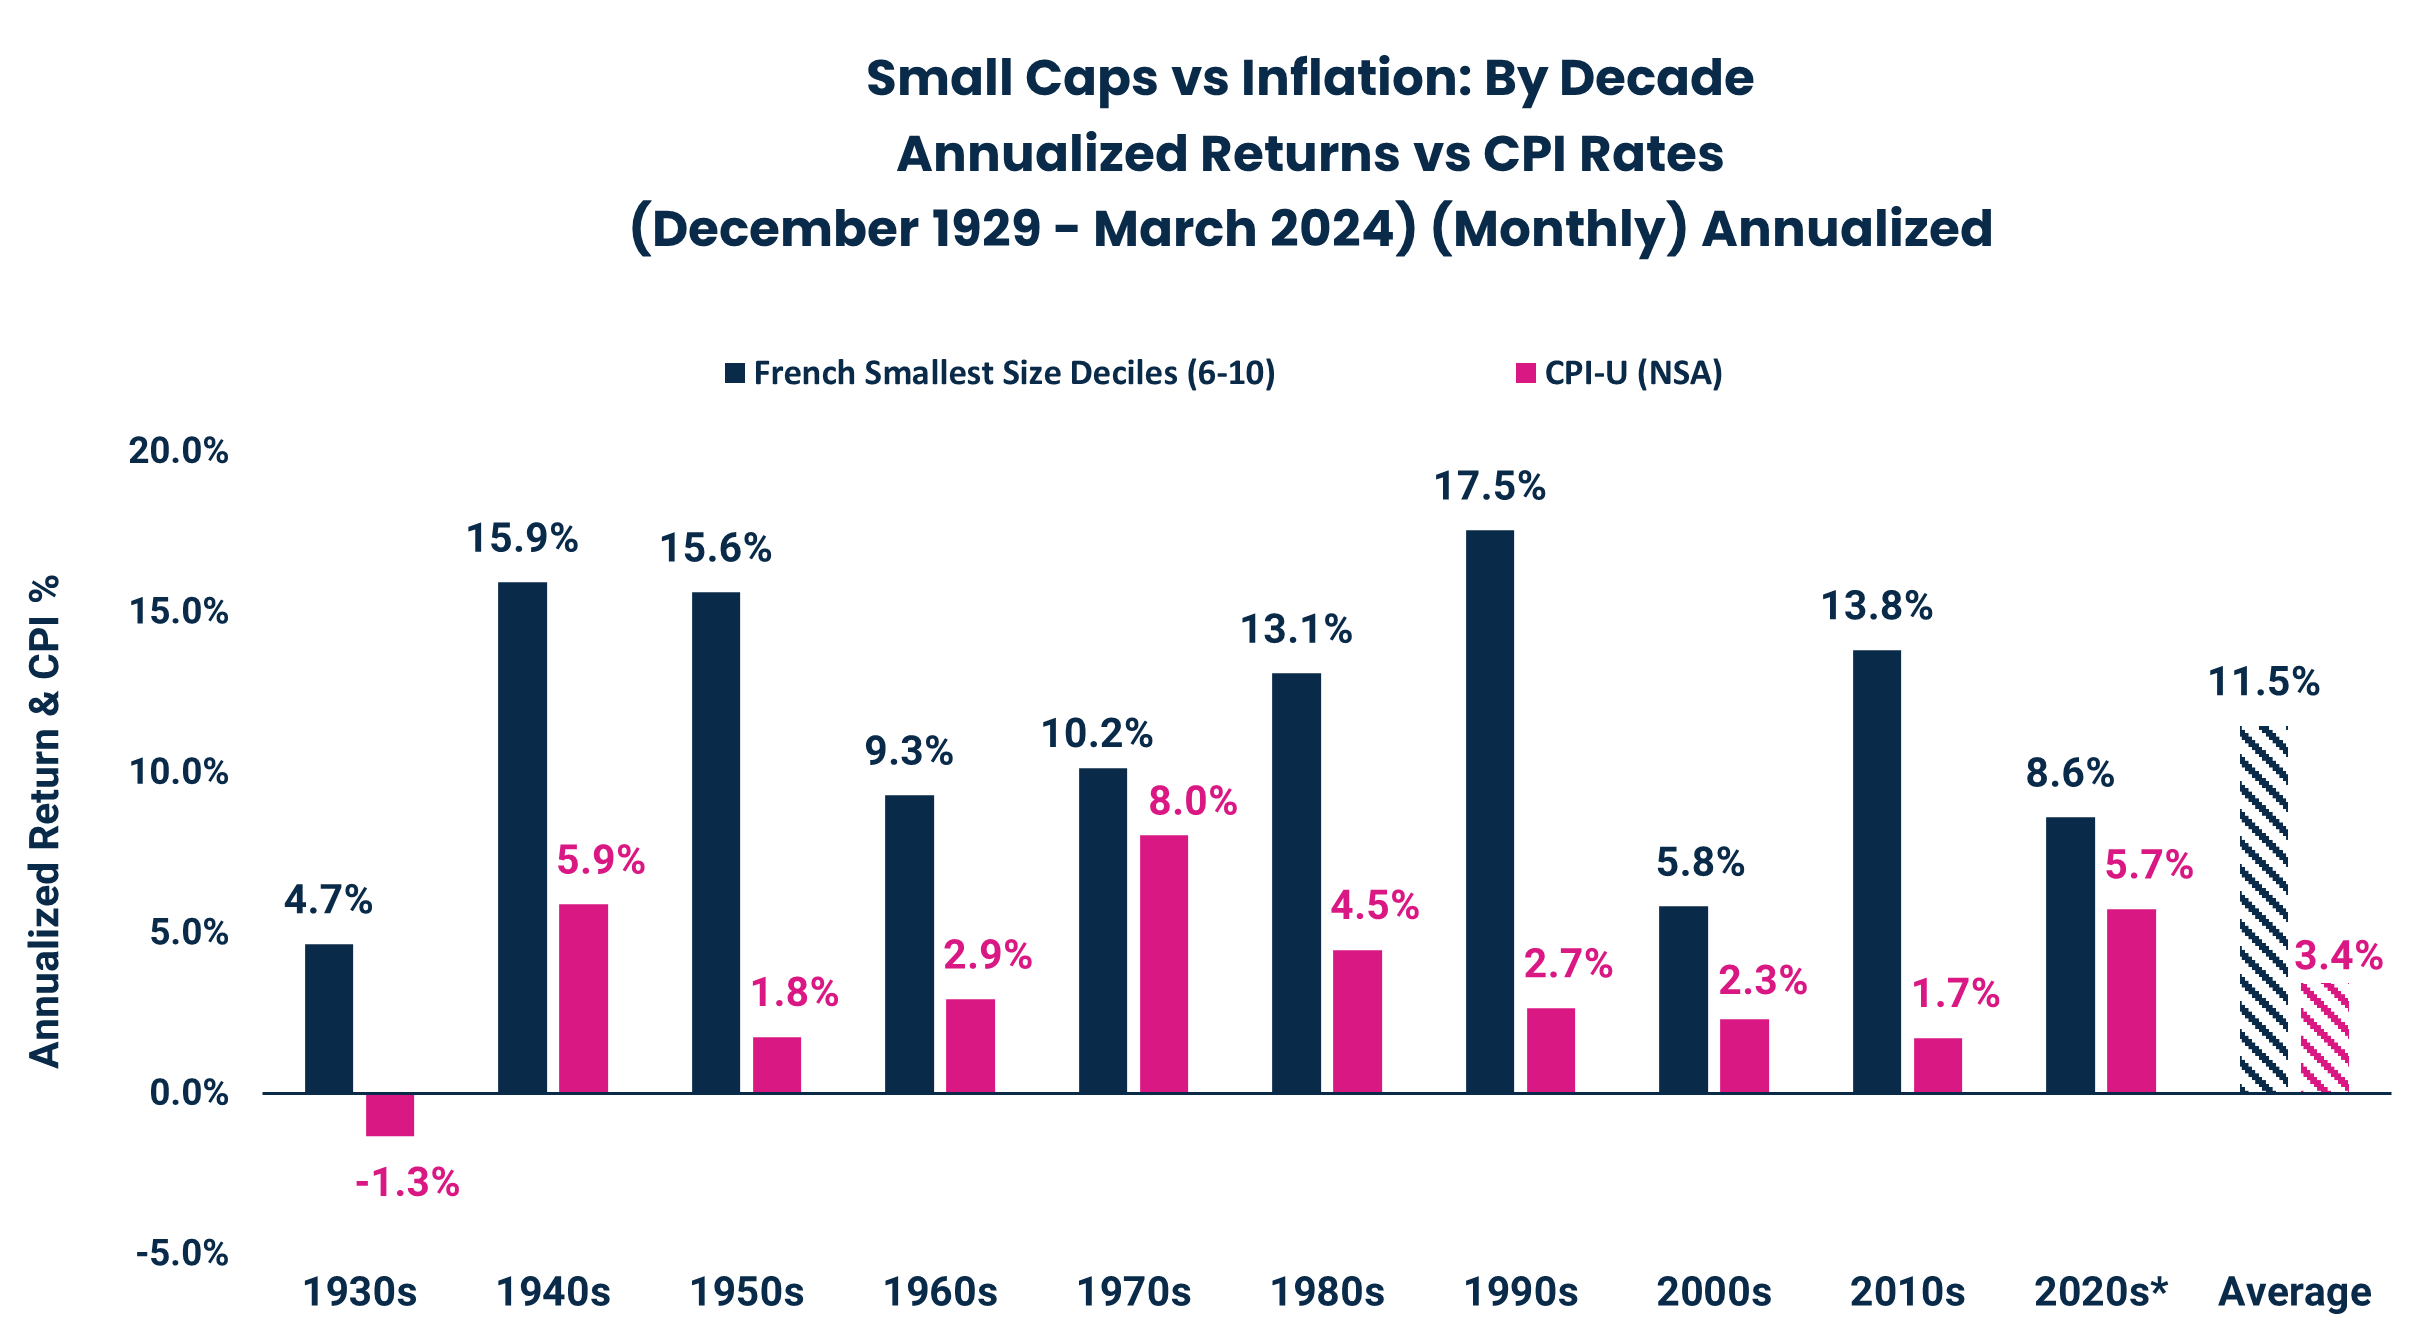 Small Caps vs Inflation: By Decade
Annualized Returns vs CPI Rates (December 1929 - March 2024) (Monthly) Annualized